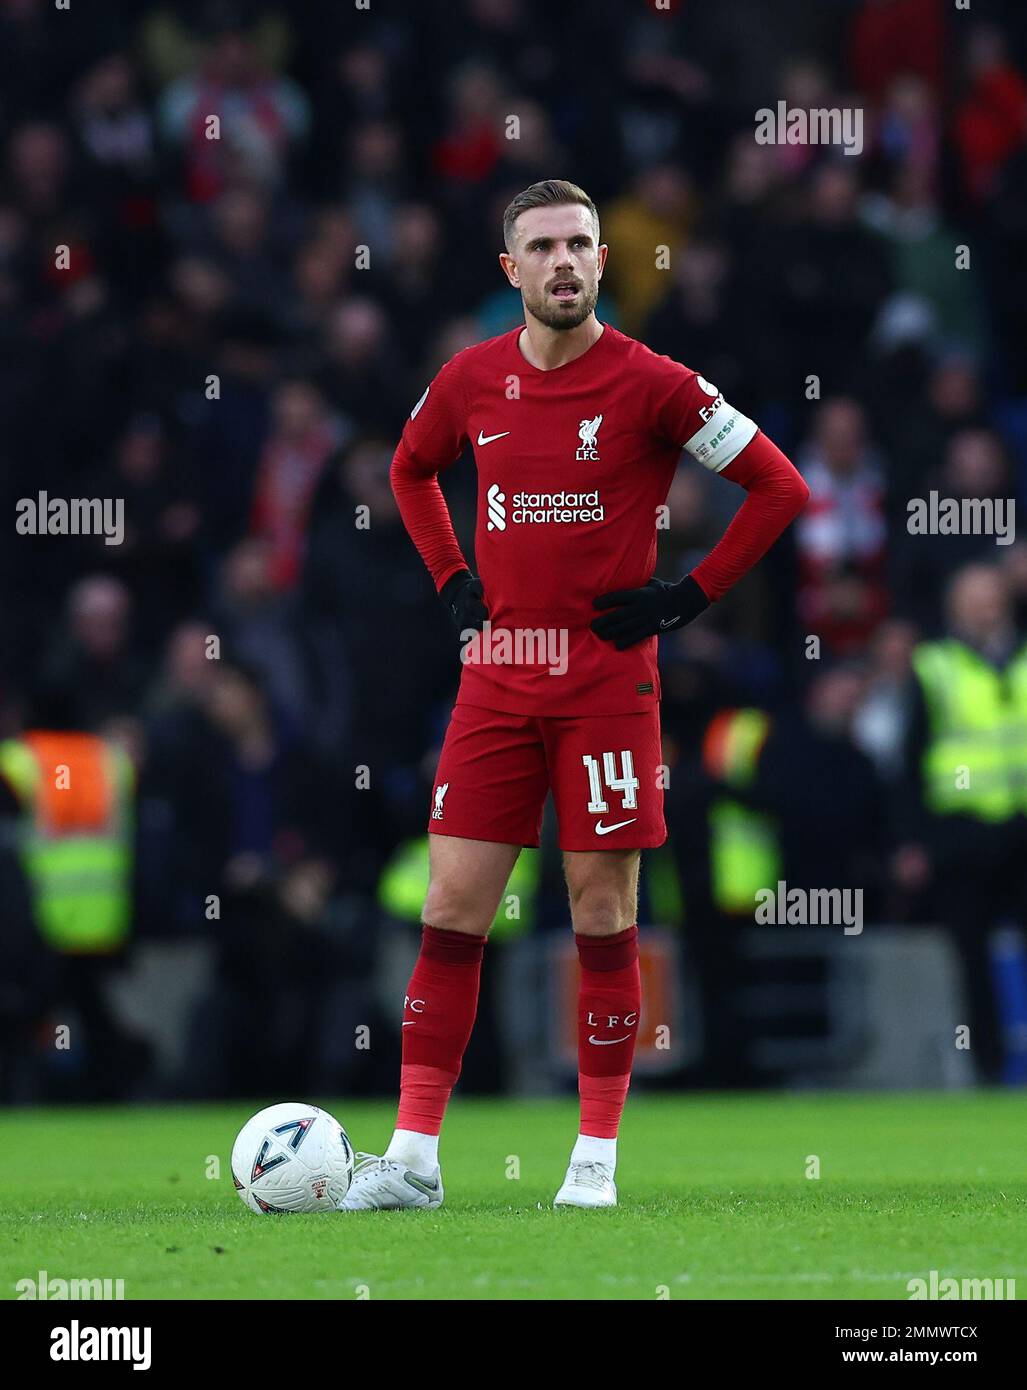 Brighton and Hove, England, 29th January 2023. Jordan Henderson of Liverpool during the The FA Cup match at the AMEX Stadium, Brighton and Hove. Picture credit should read: David Klein / Sportimage Stock Photo